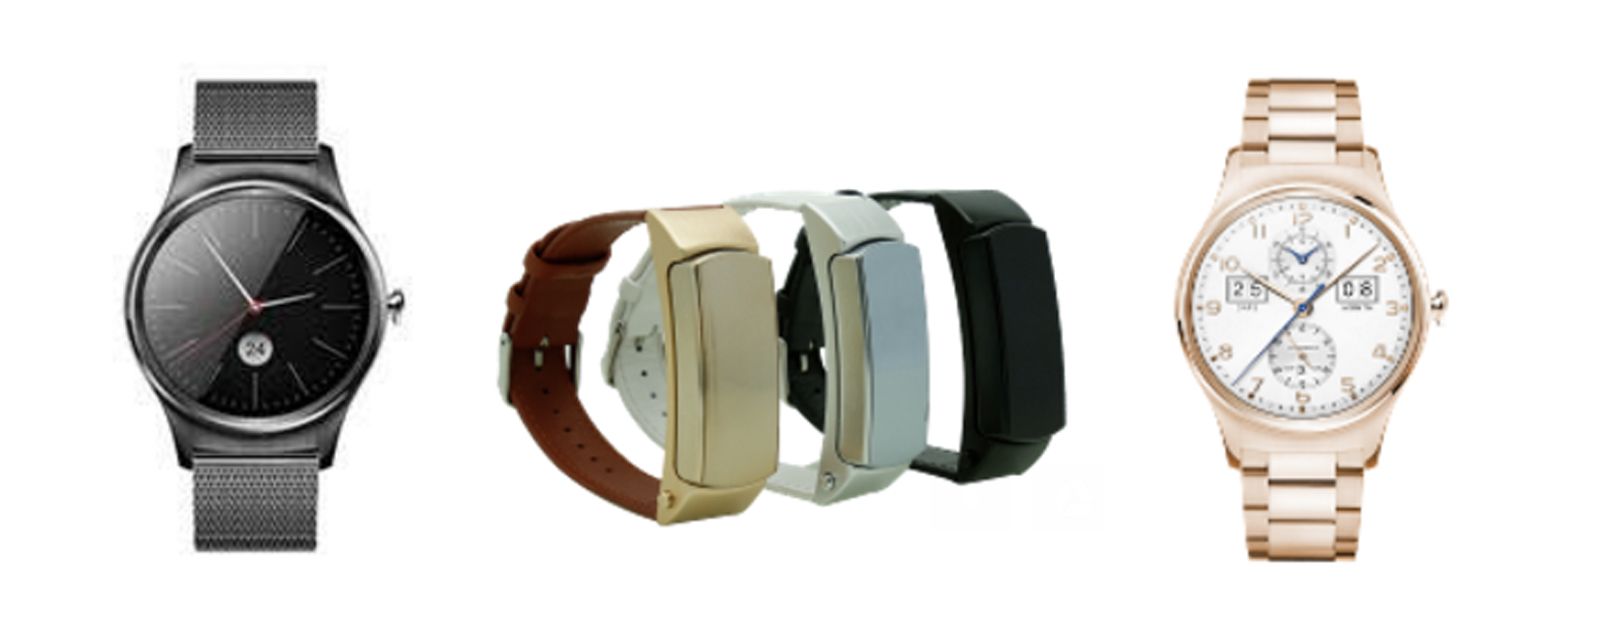 haier now makes wearables haierwatch smartwatch and h band activity trackers image 1